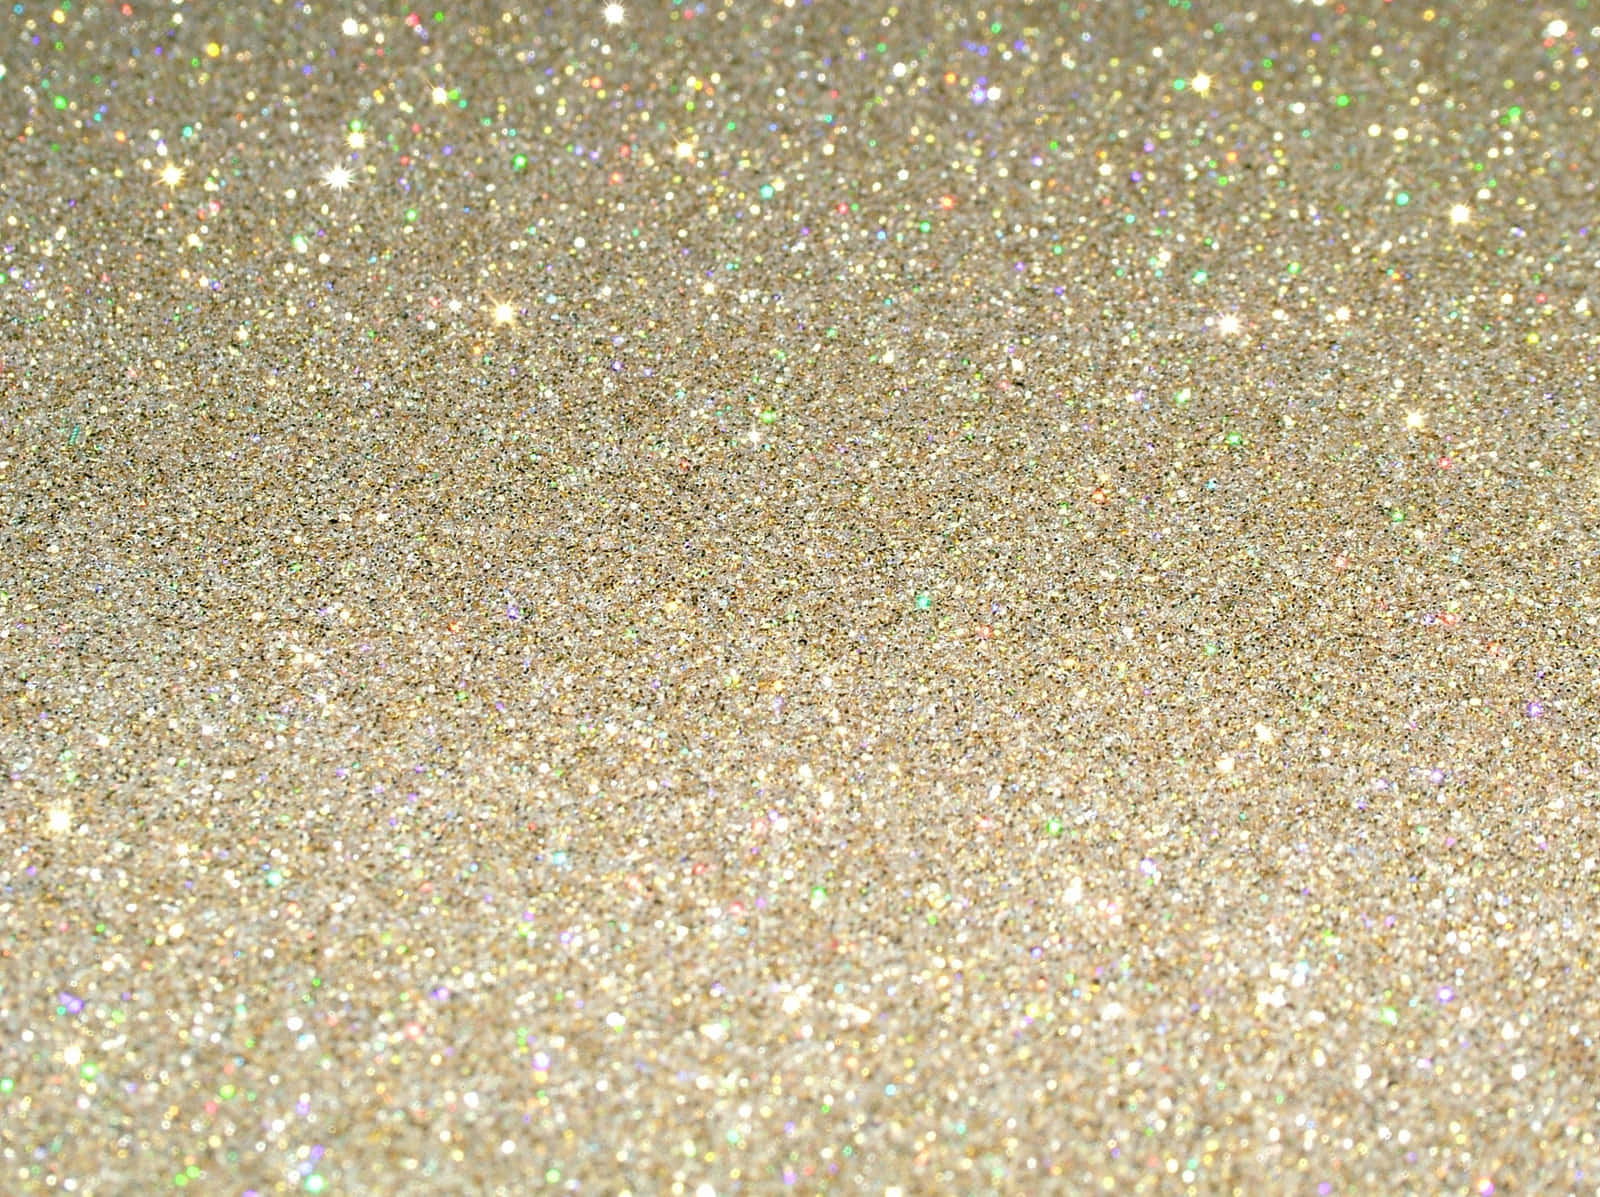 A Glittery Background In a Magical World